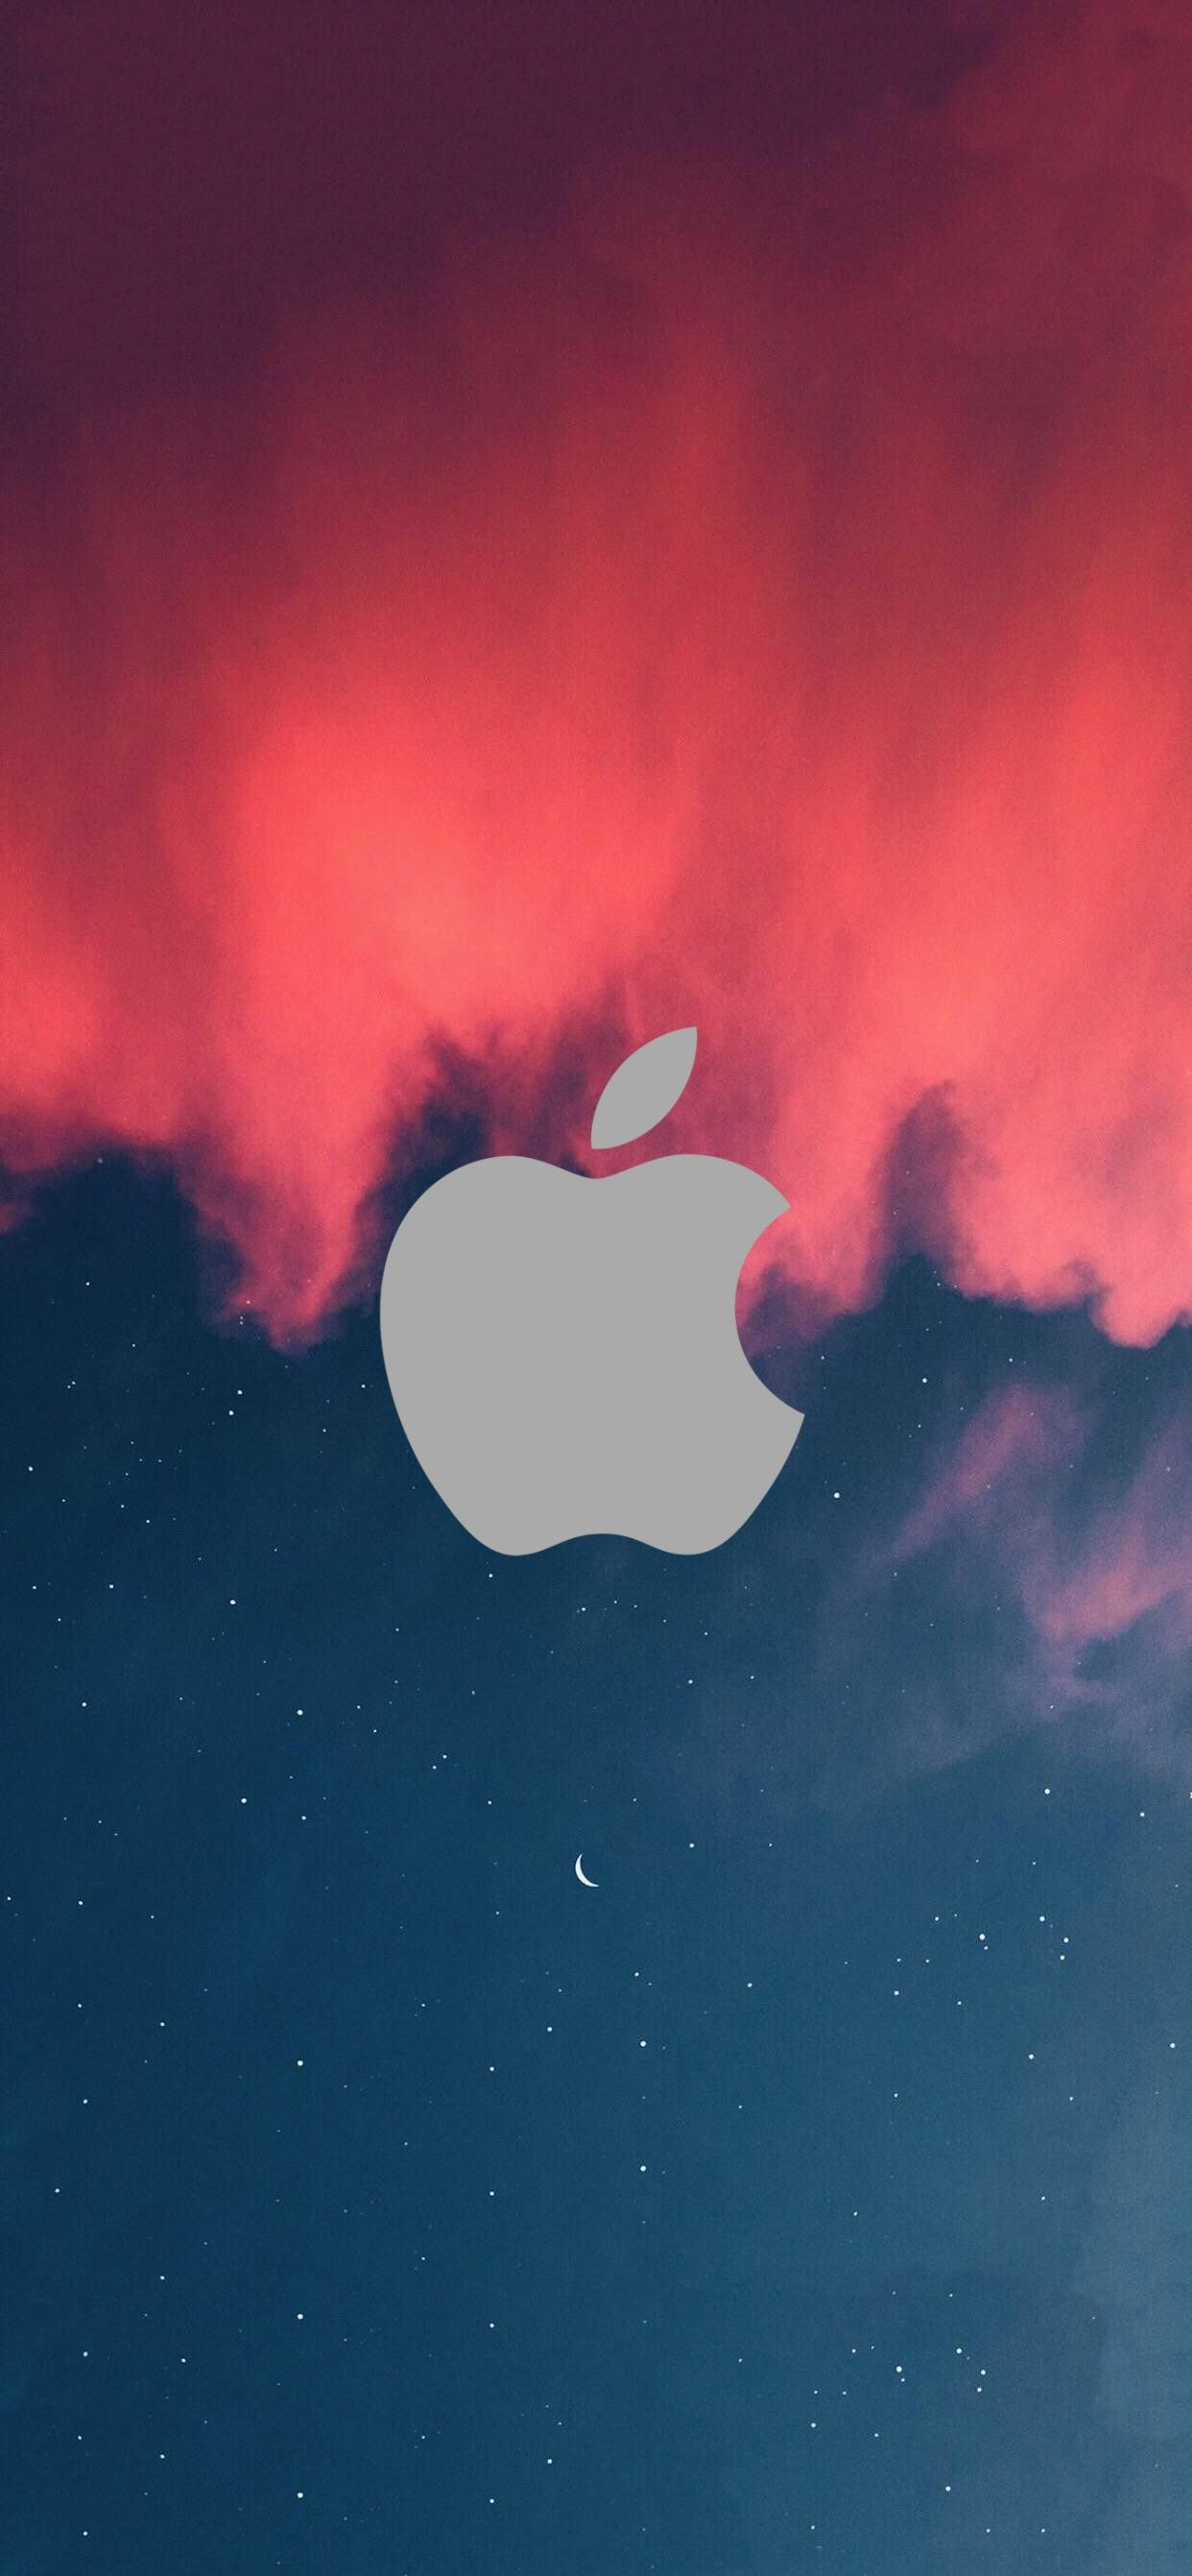 1242x2683 Pin by Brave Lord on My apple logos | Apple logo wallpaper iphone, Apple wallpaper, Apple logo wallpaper